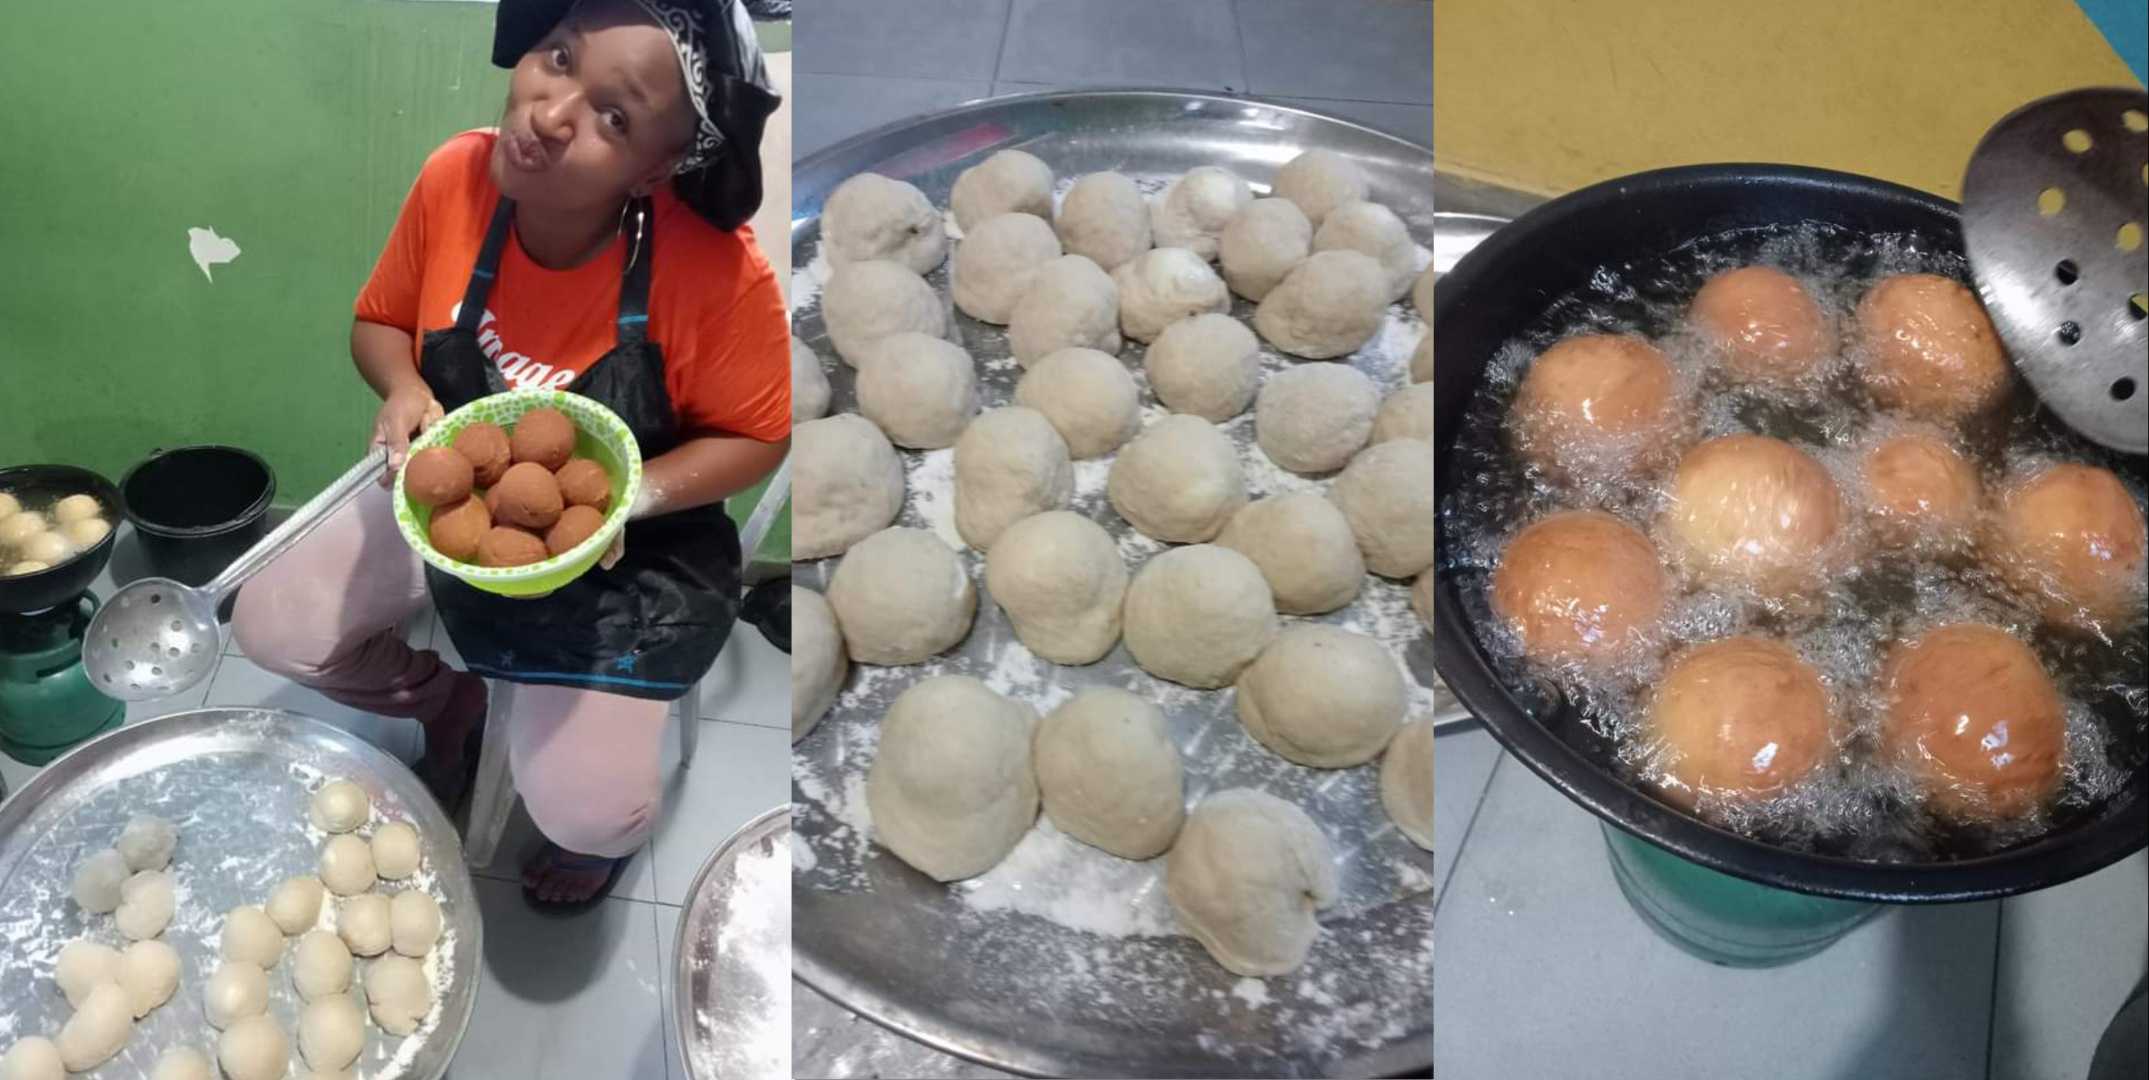 "The sky don full" – Reactions as lady begins 130-hour Fry-a-Thon